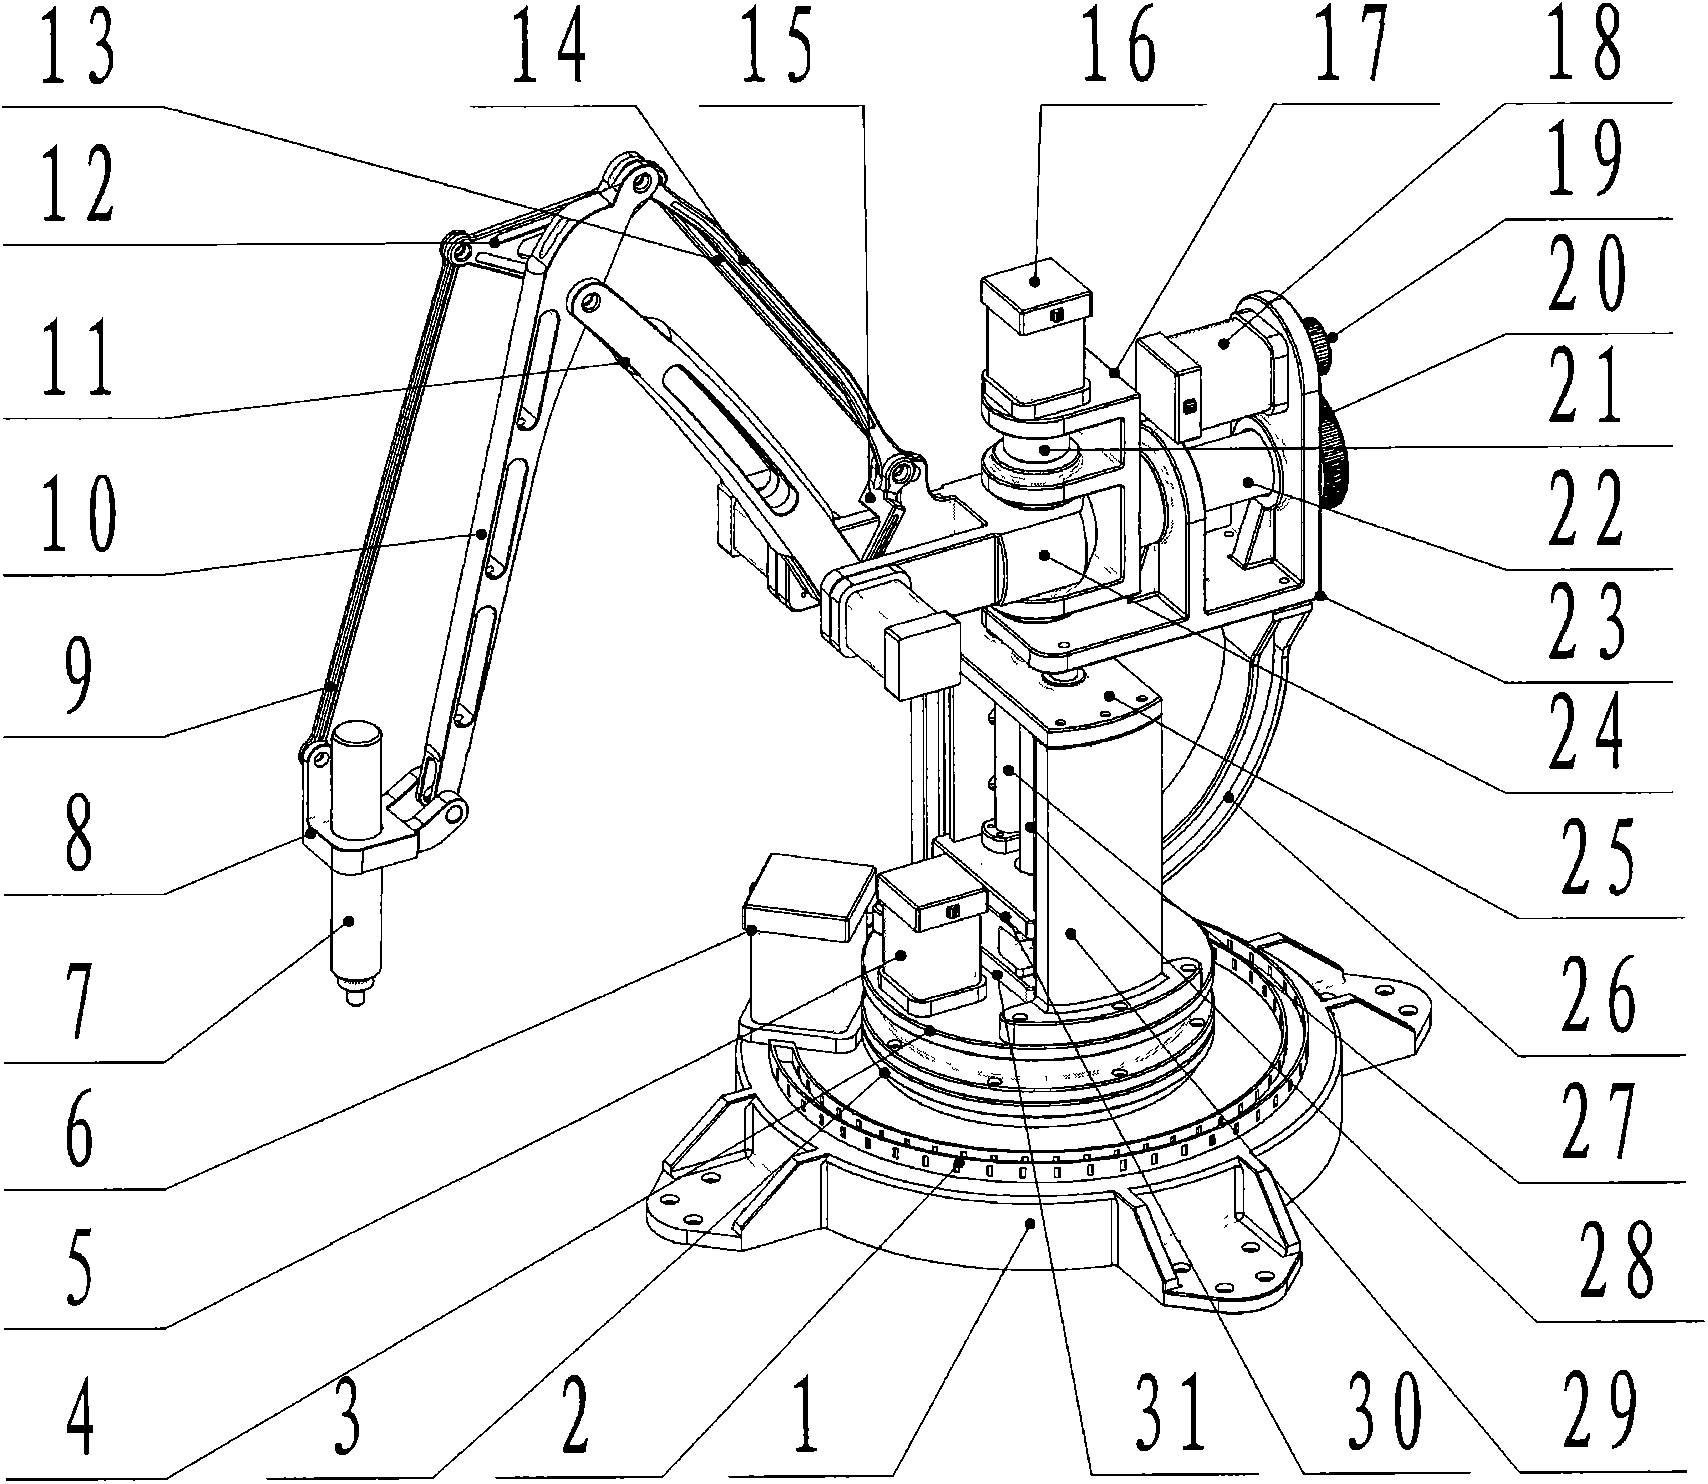 Series-parallel industrial robot with five degrees of freedom